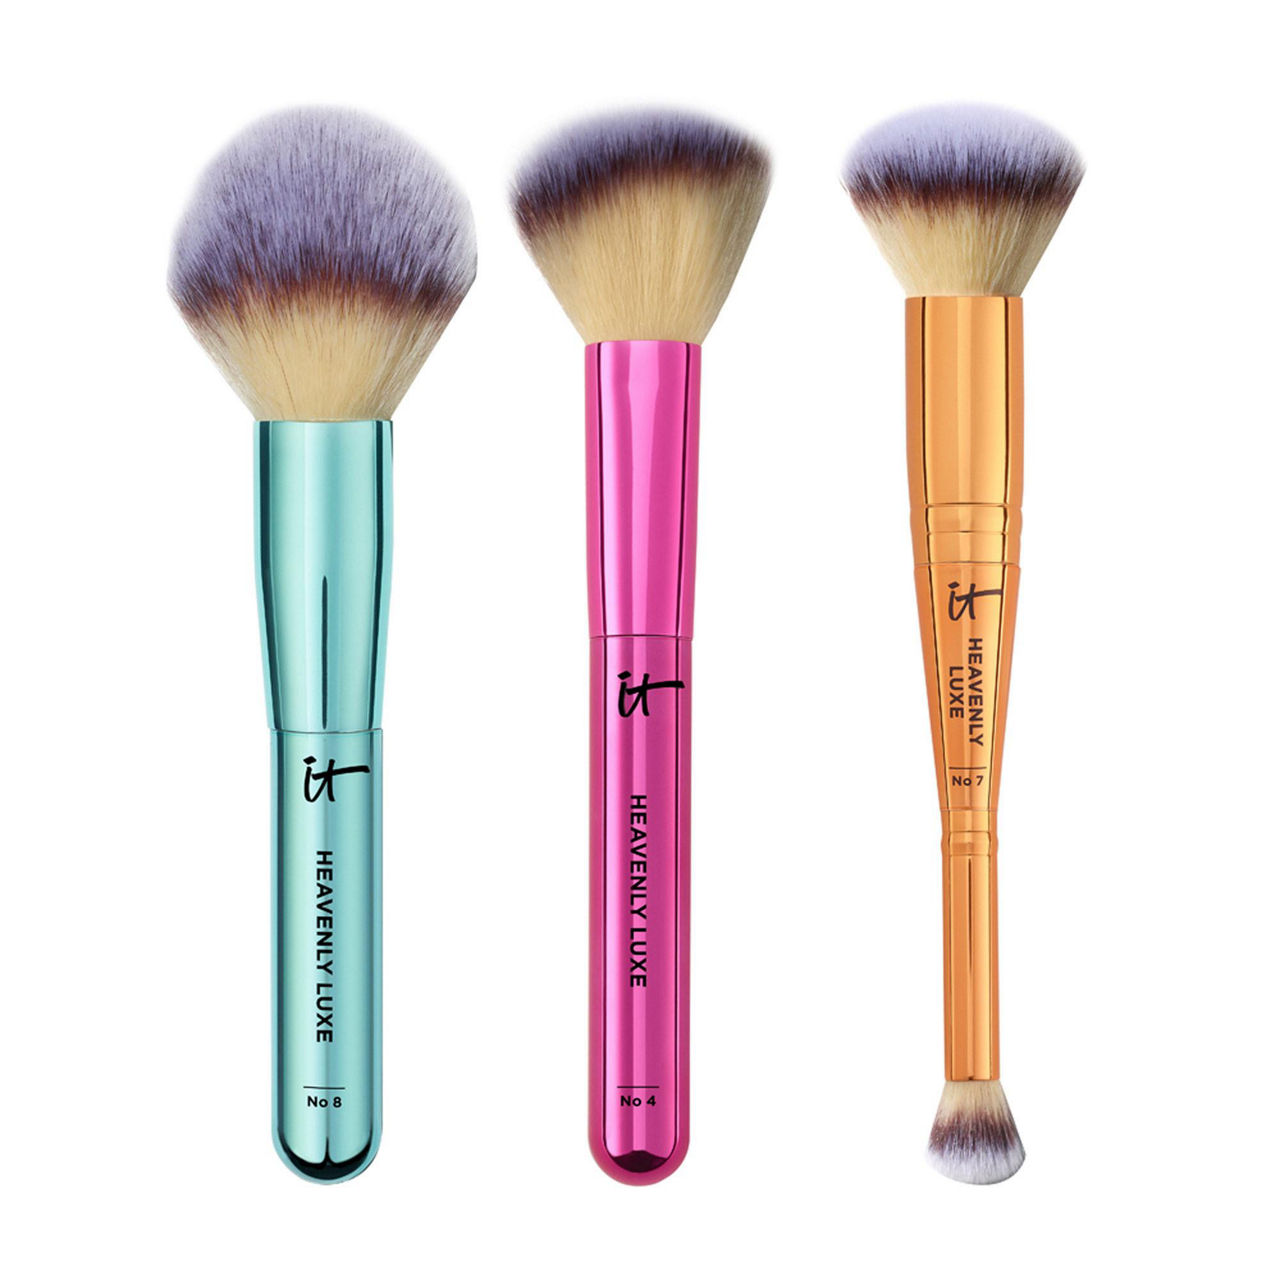 IT COSMETICS Heavenly Luxe Limited-Edition 3-Piece Makeup Brush Set